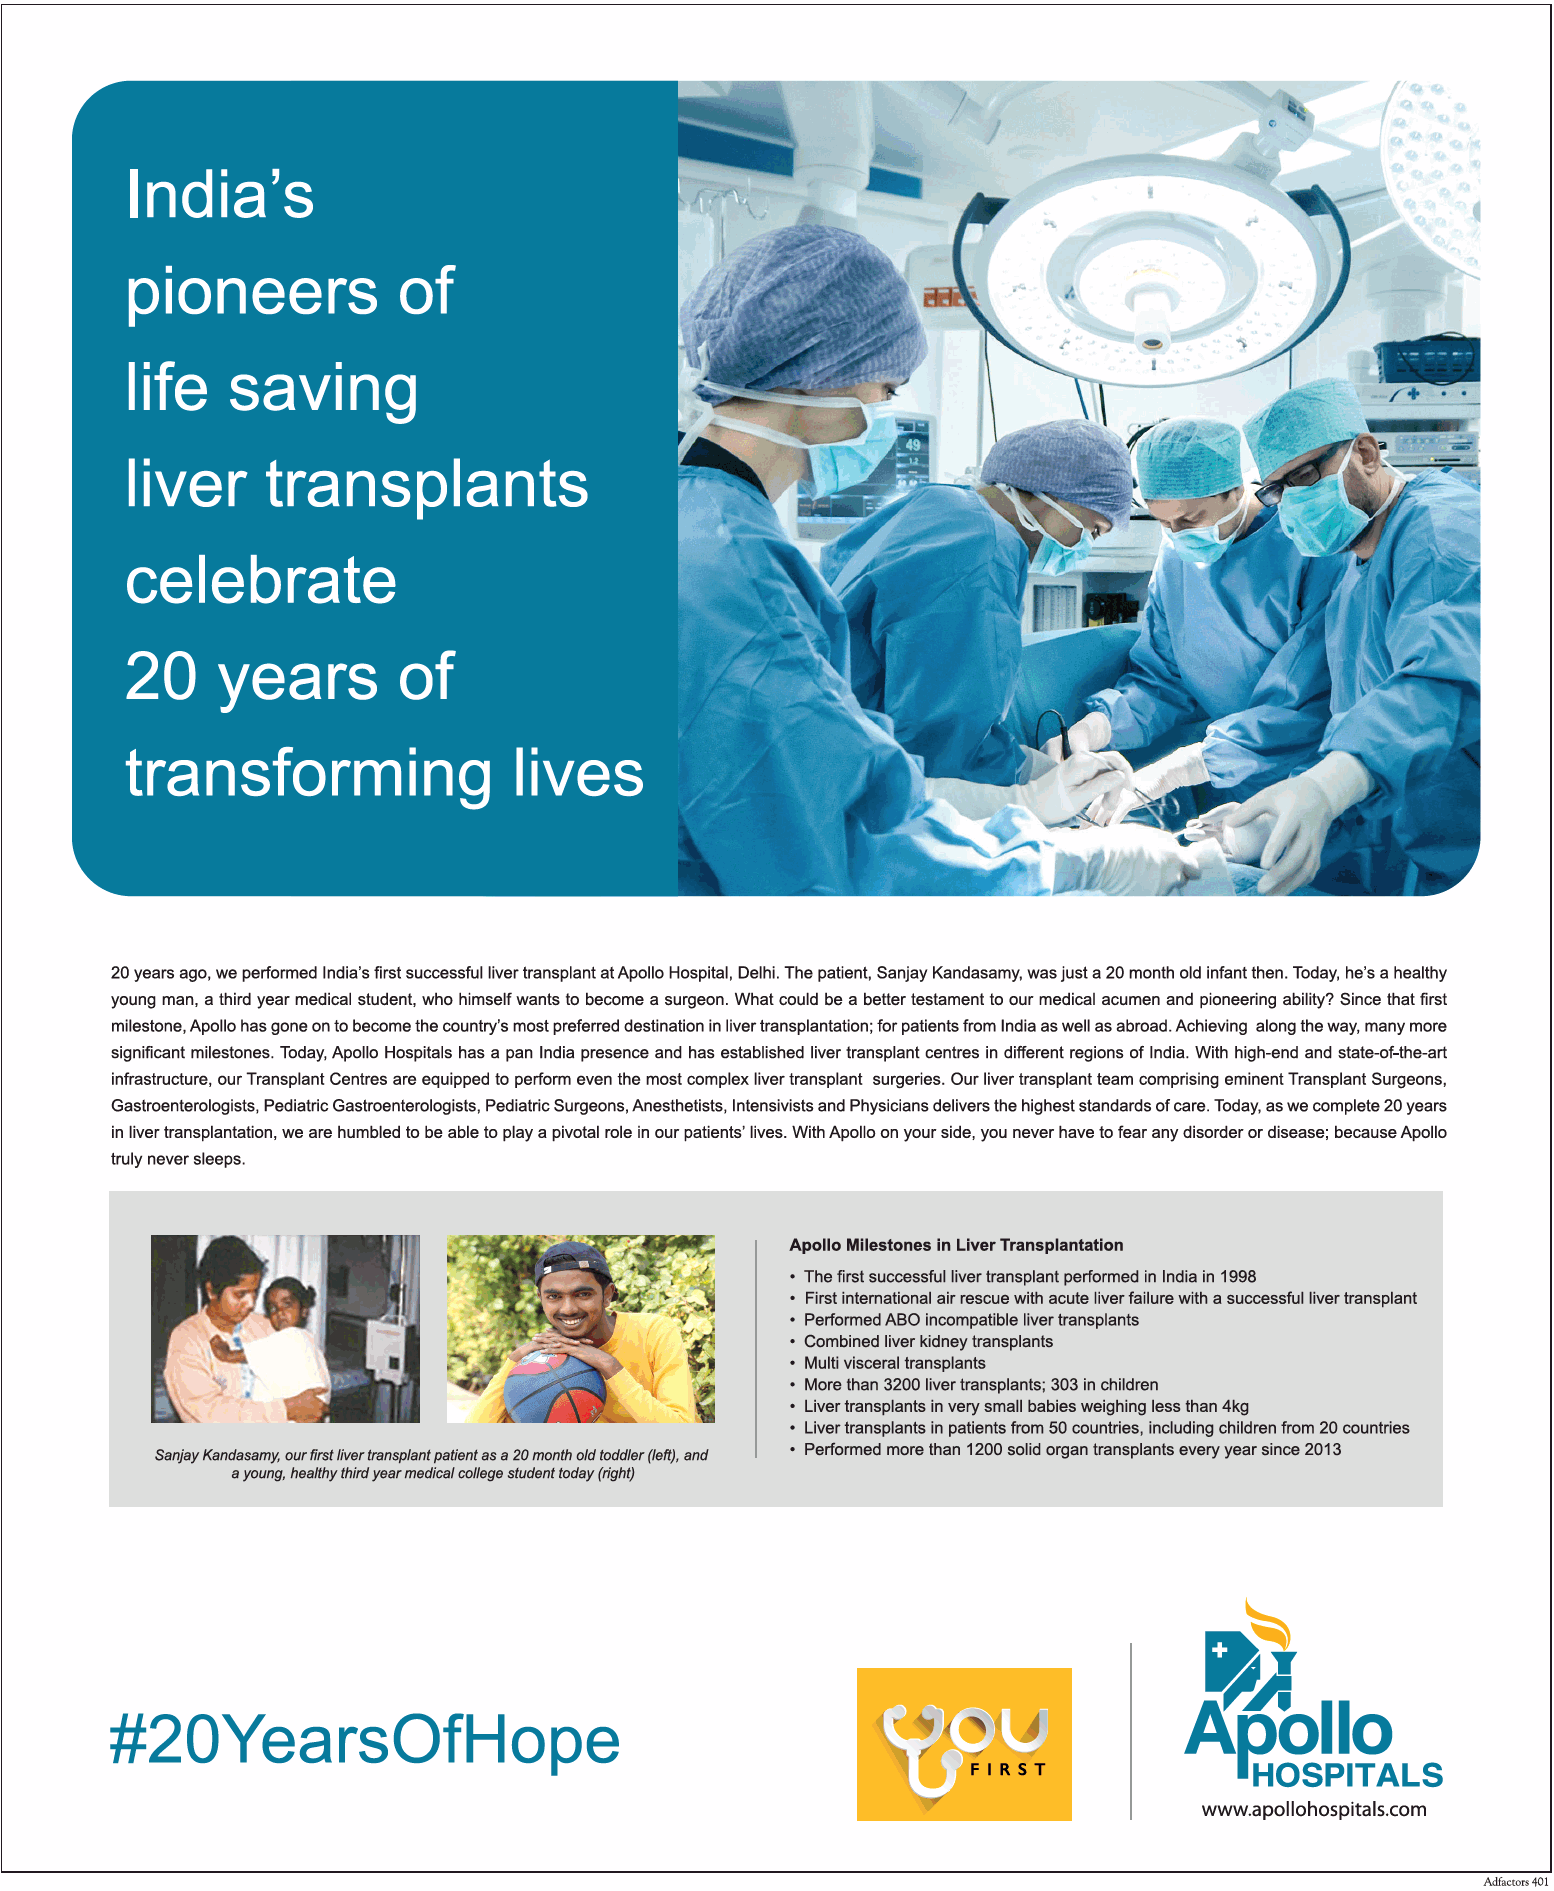 apollo-hospitals-indias-pioneers-of-life-savings-ad-times-of-india-delhi-15-11-2018.png